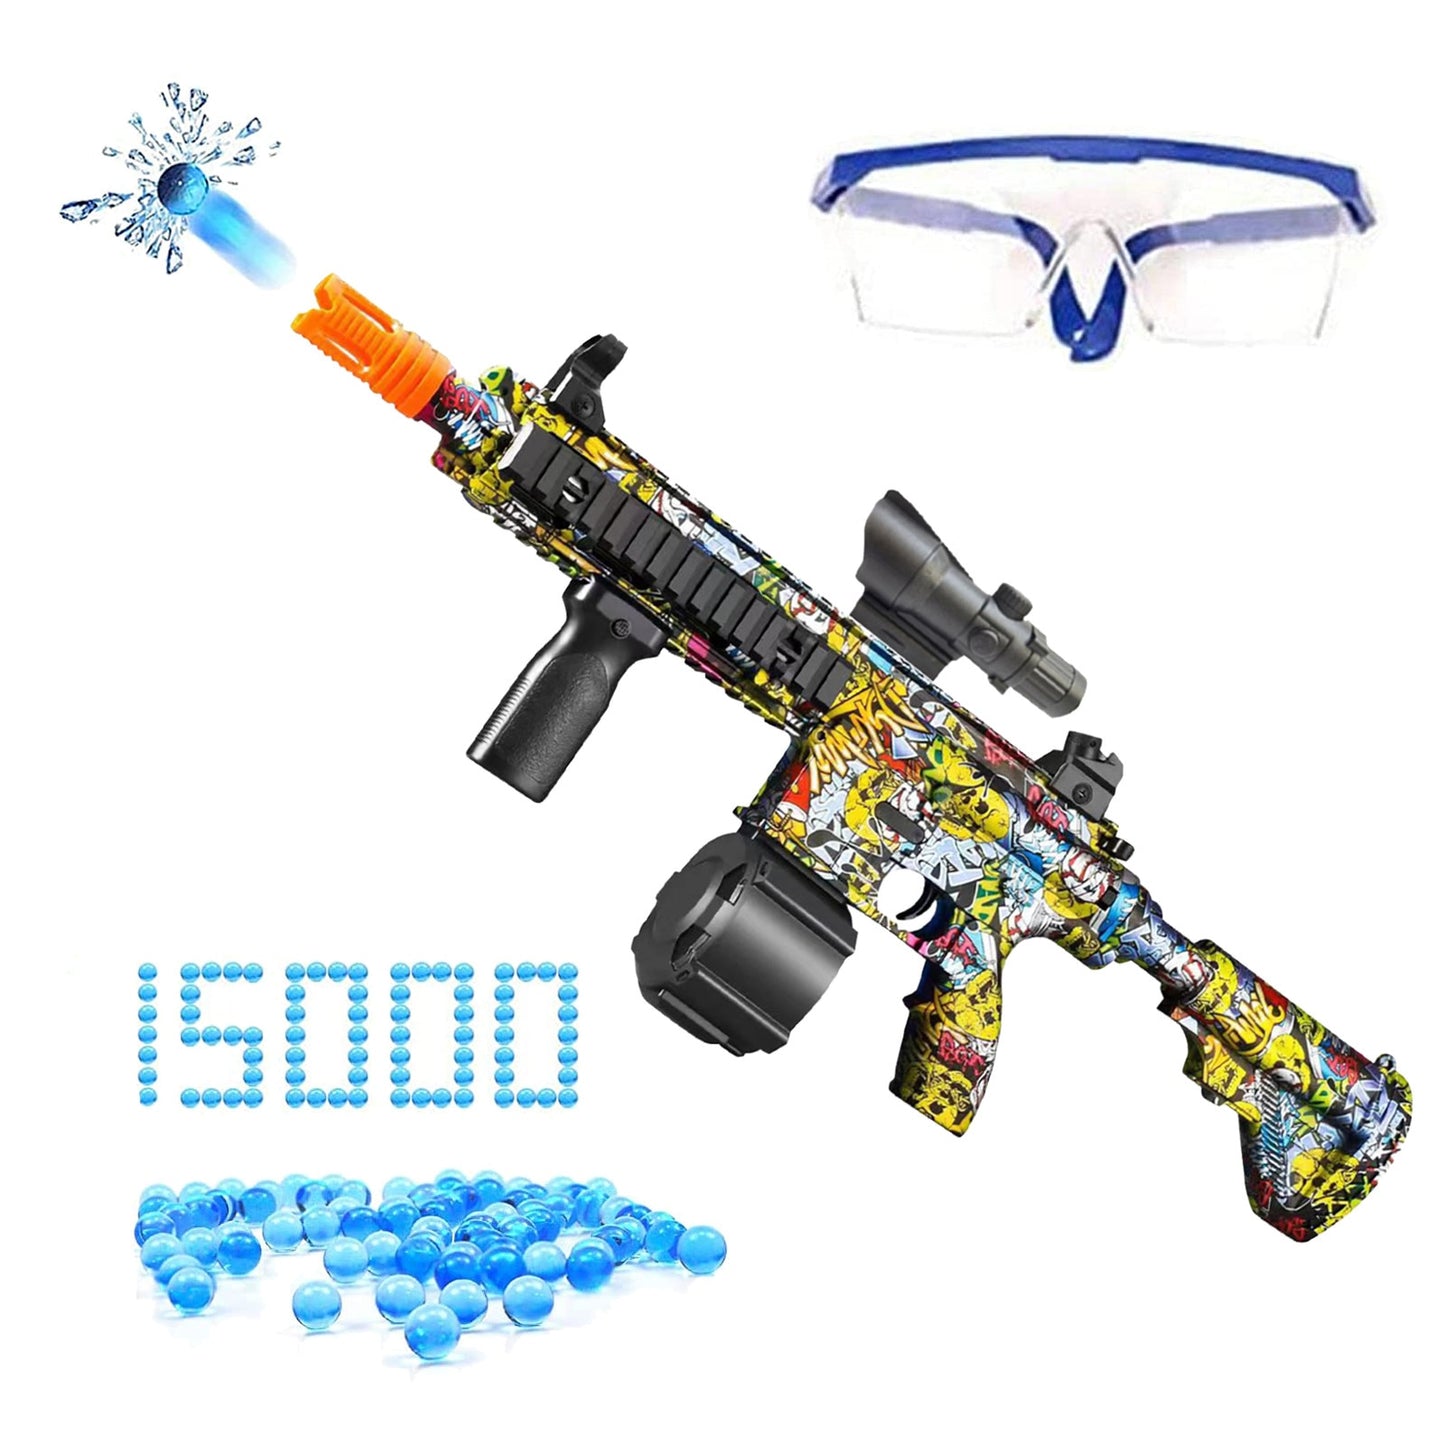 Two-in-one Gel Ball Blaster gadgets